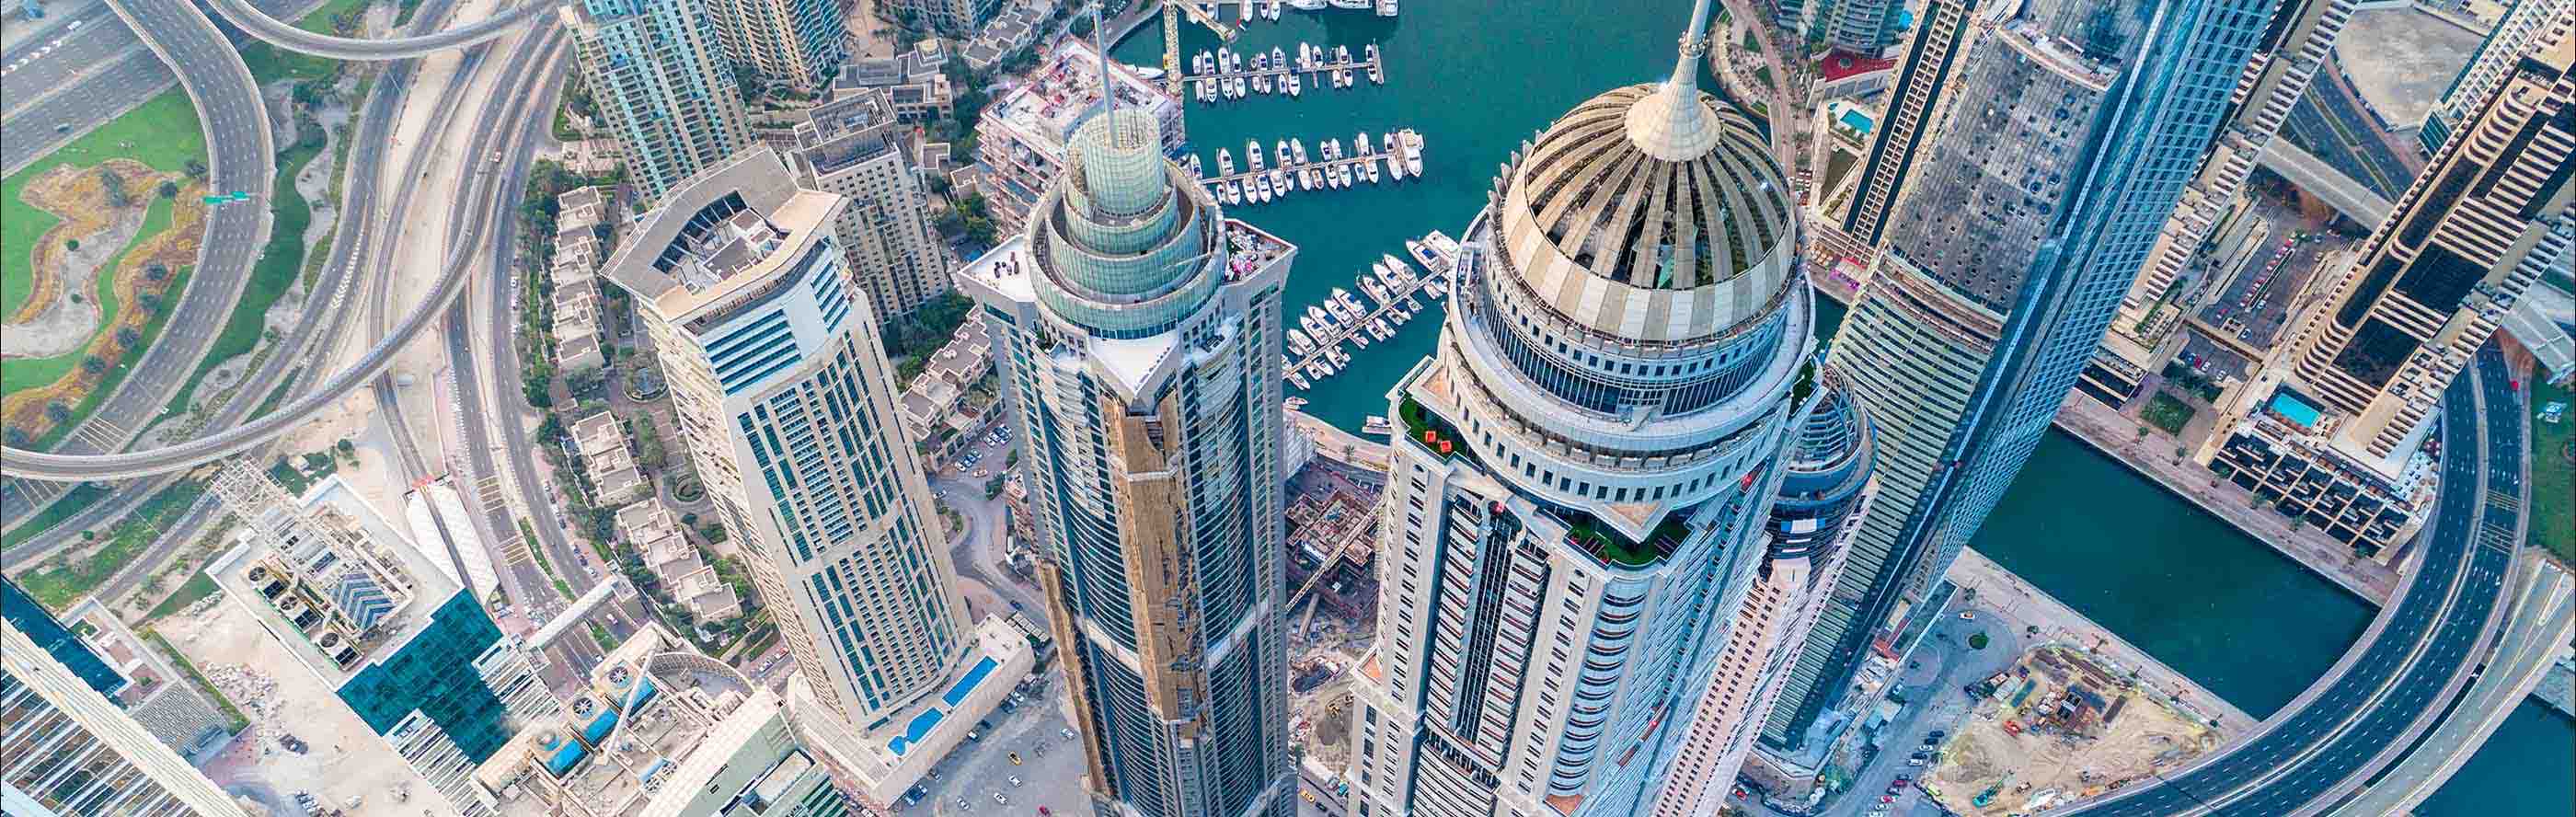 Aerial view of skyscrapers in a city